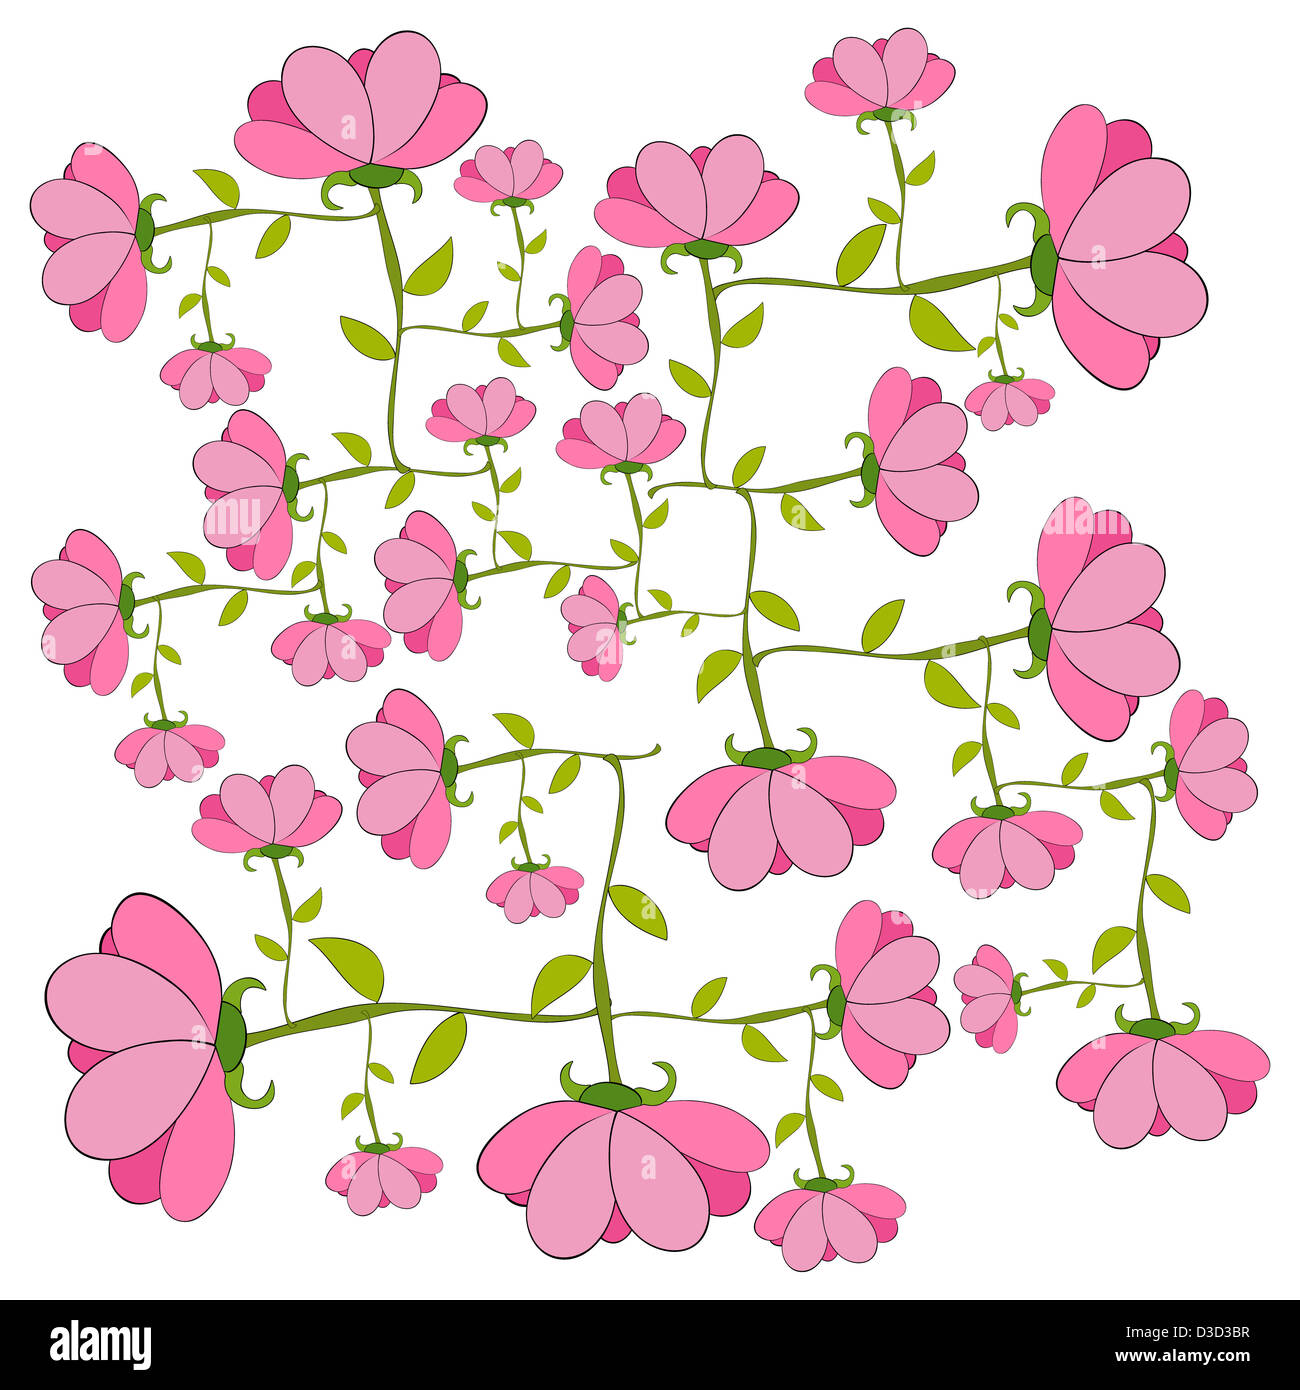 Pink spring flowers isolated. Vector file layered for easy manipulation and custom coloring. Stock Photo